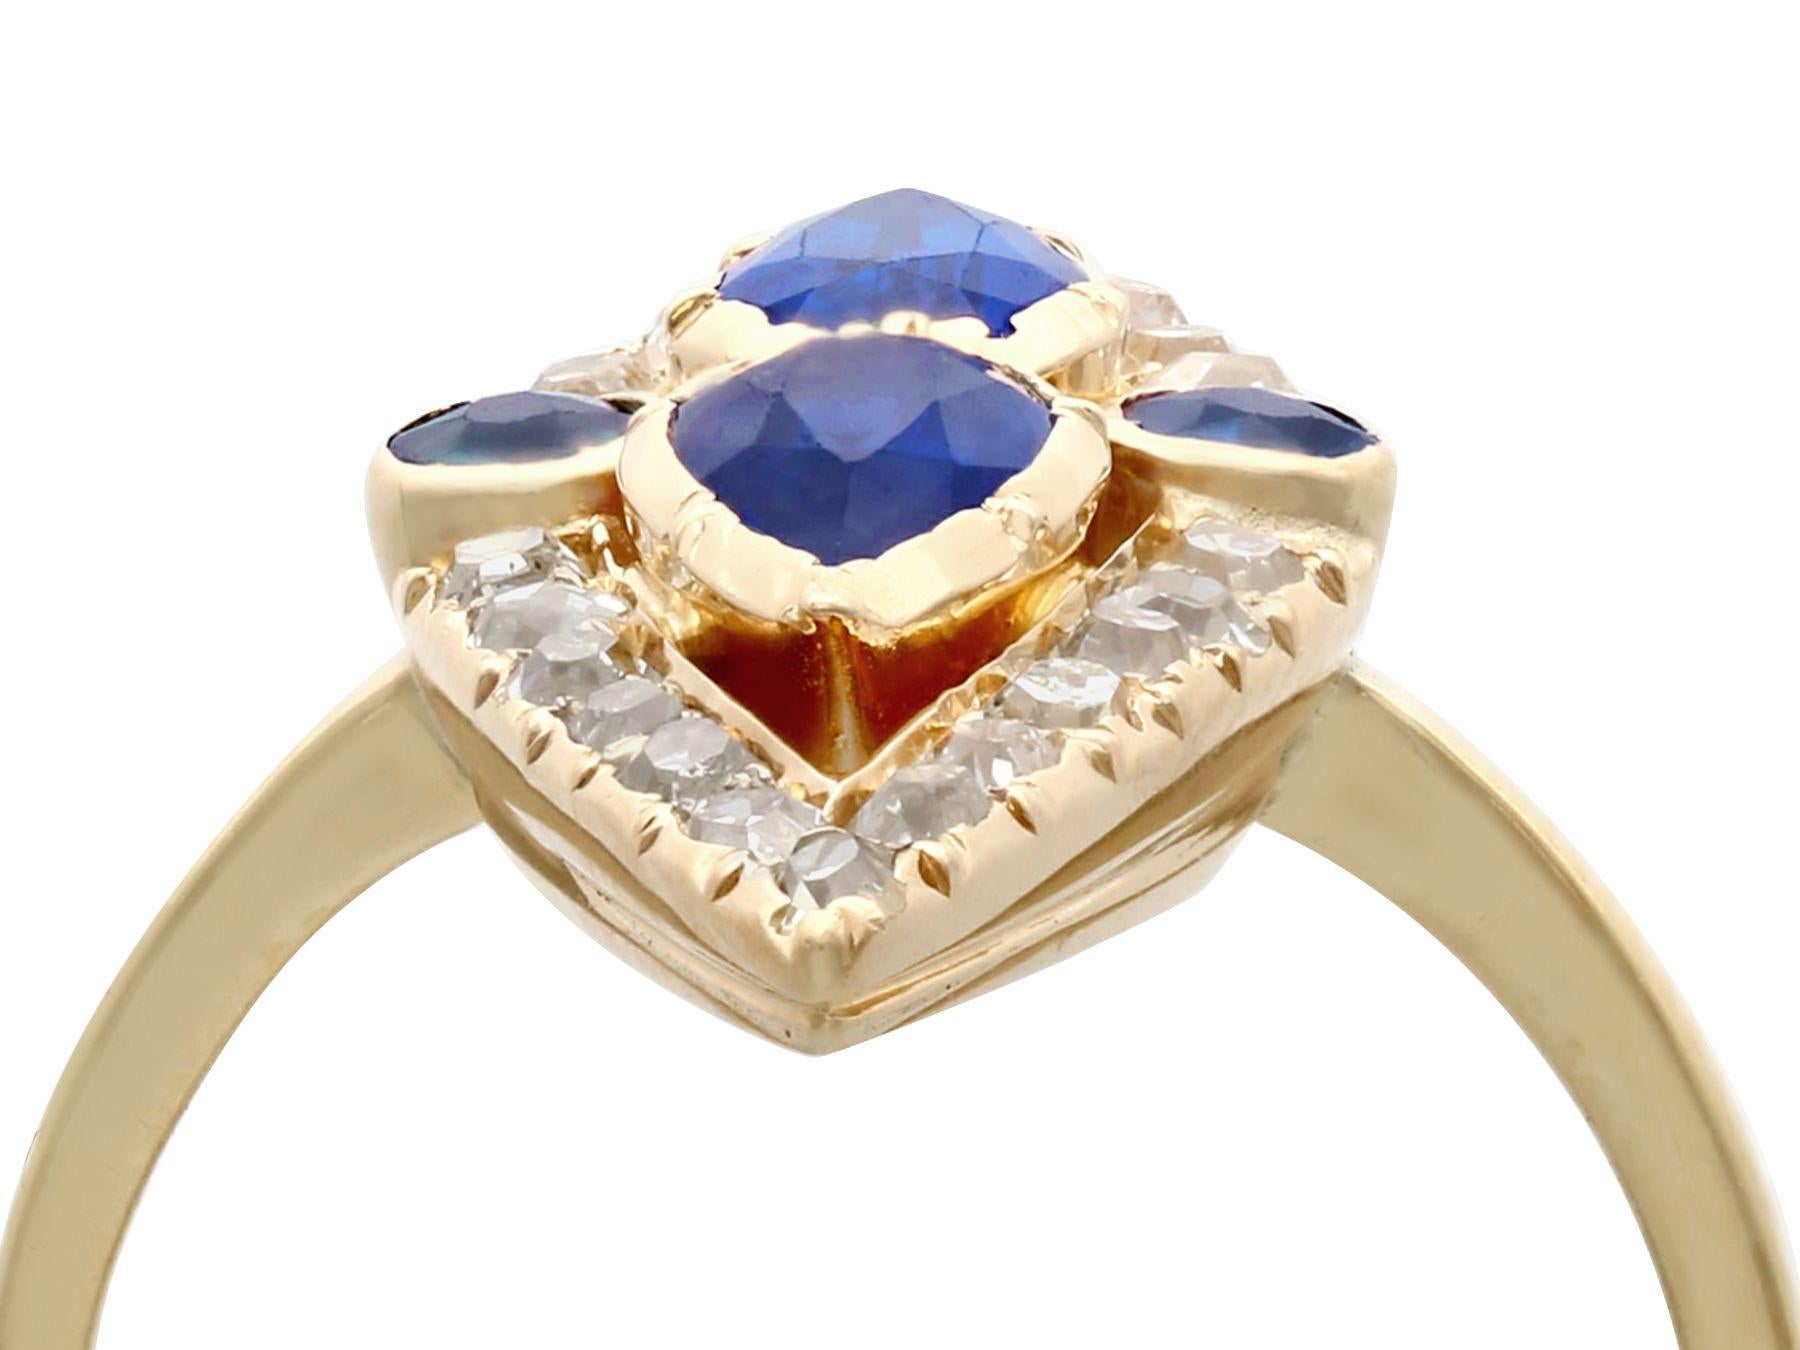 A stunning Victorian 1.35 carat blue sapphire and 1.32 carat diamond, 15 karat yellow gold marquise ring; part of our diverse antique jewelry collections.

This stunning, fine and impressive sapphire and diamond ring has been crafted in 15k yellow